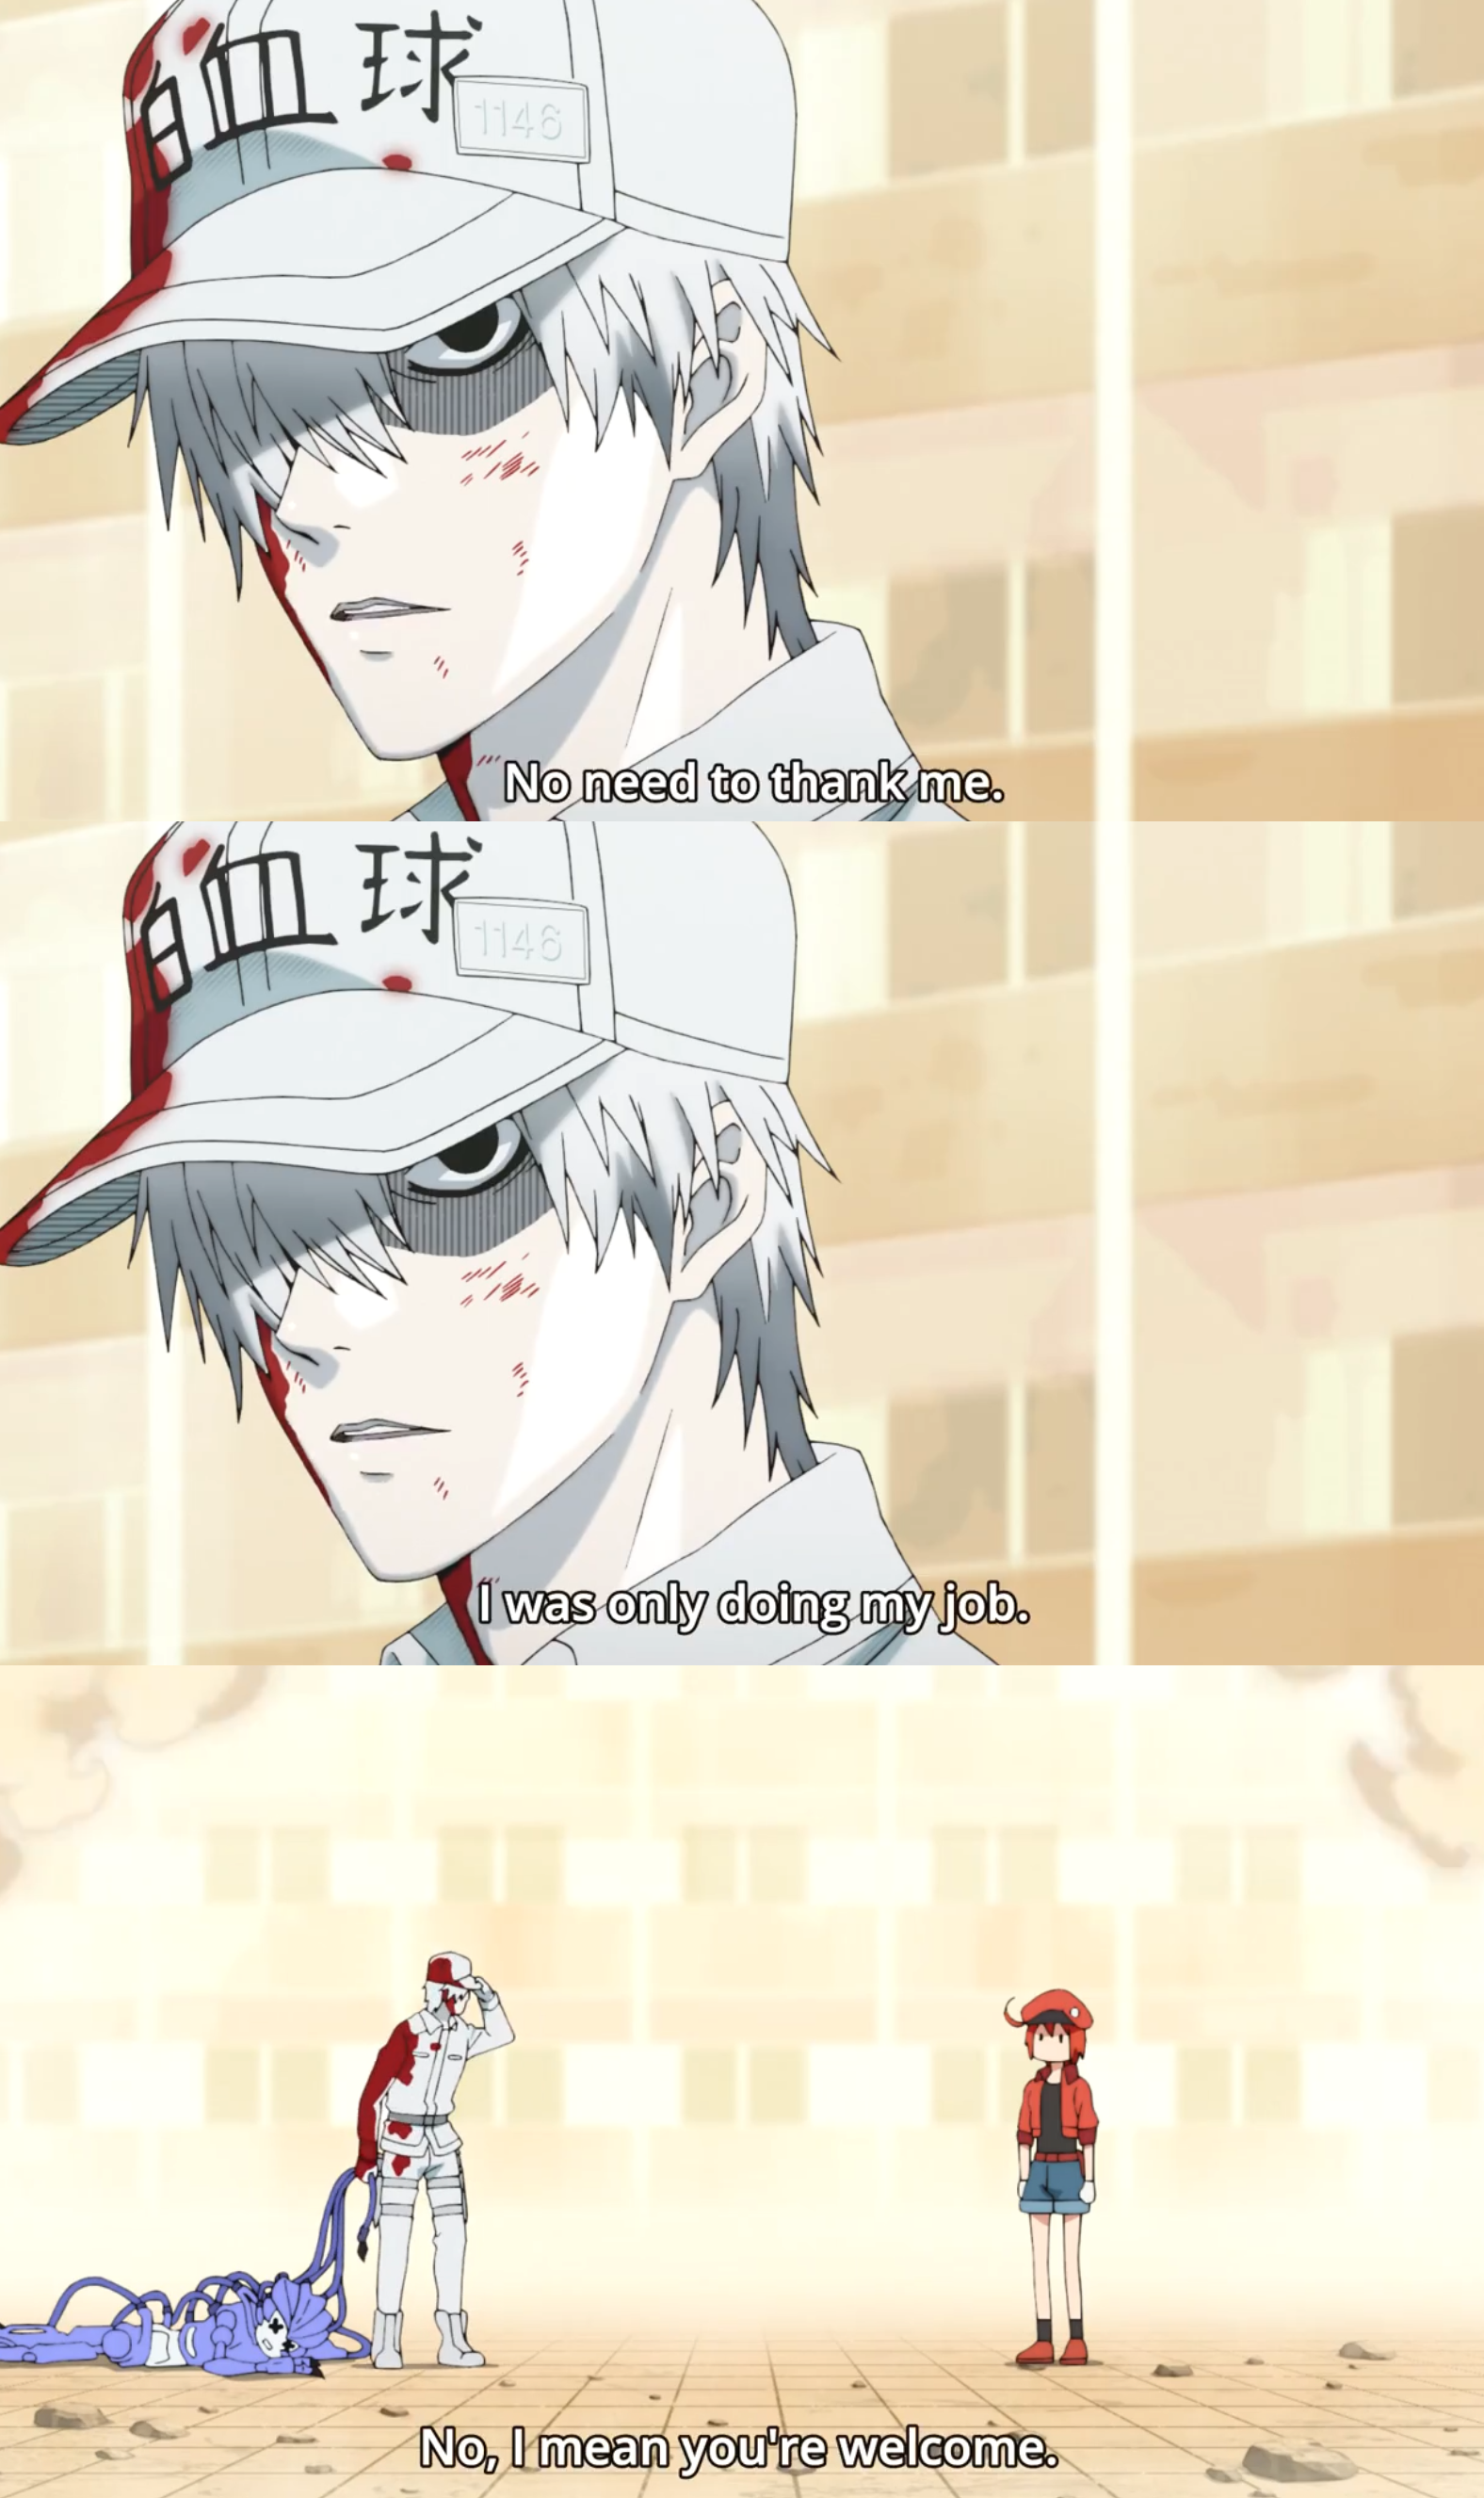 White Blood Cell 1212 from Cells at Work Code Black